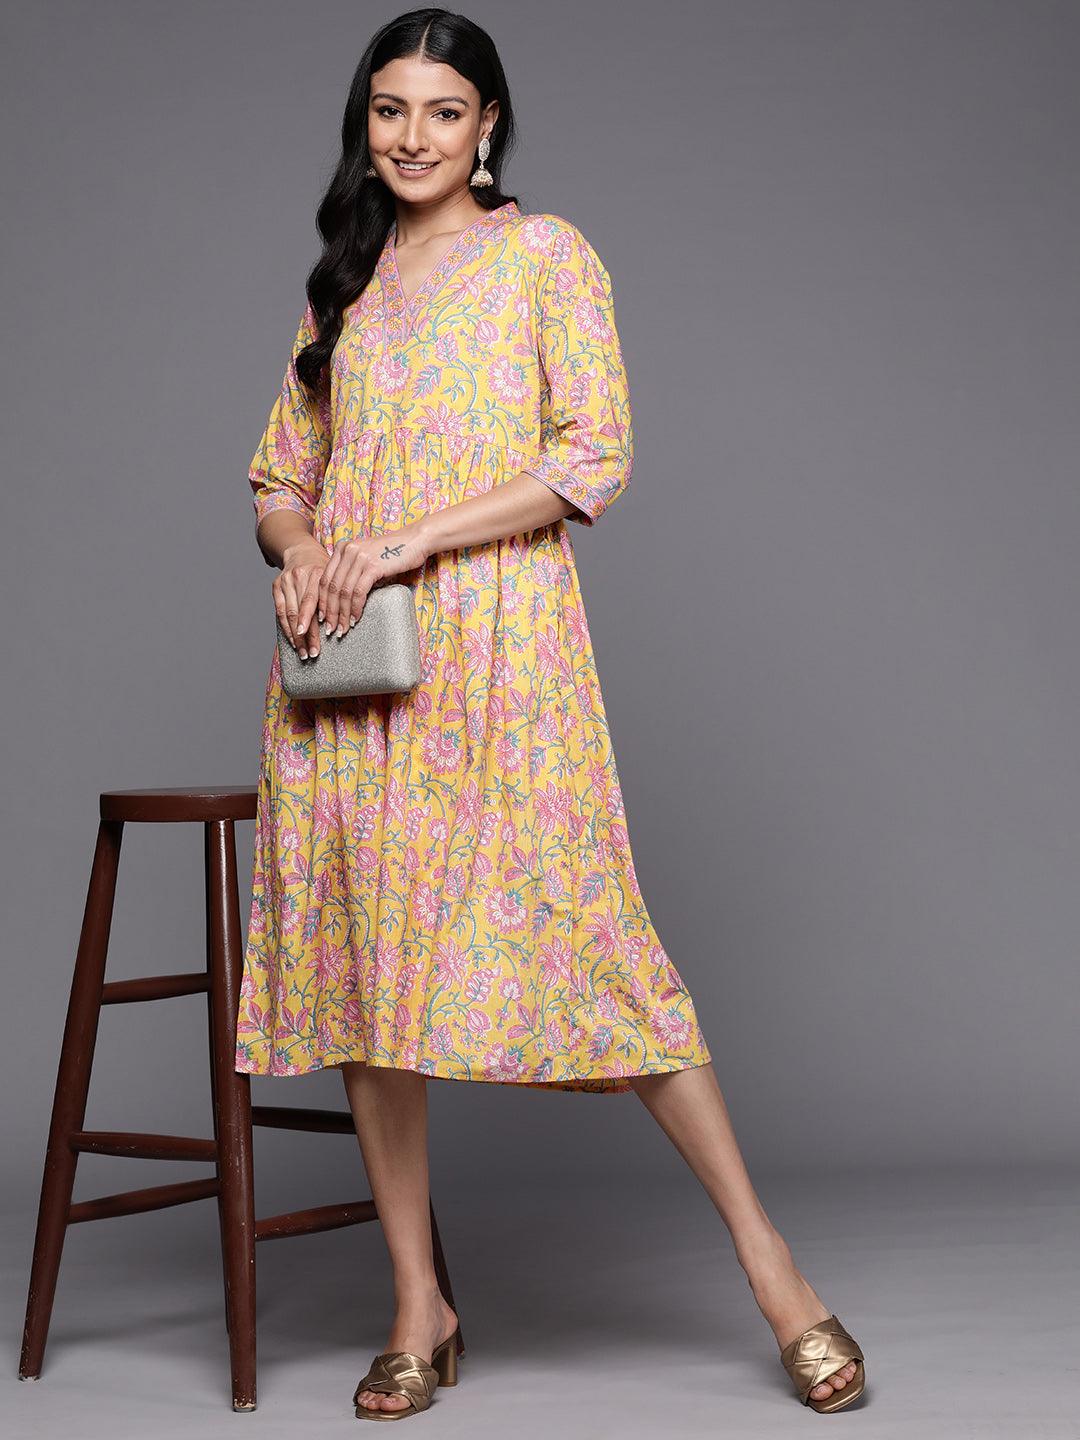 Yellow Printed Cotton Fit and Flare Dress - Libas